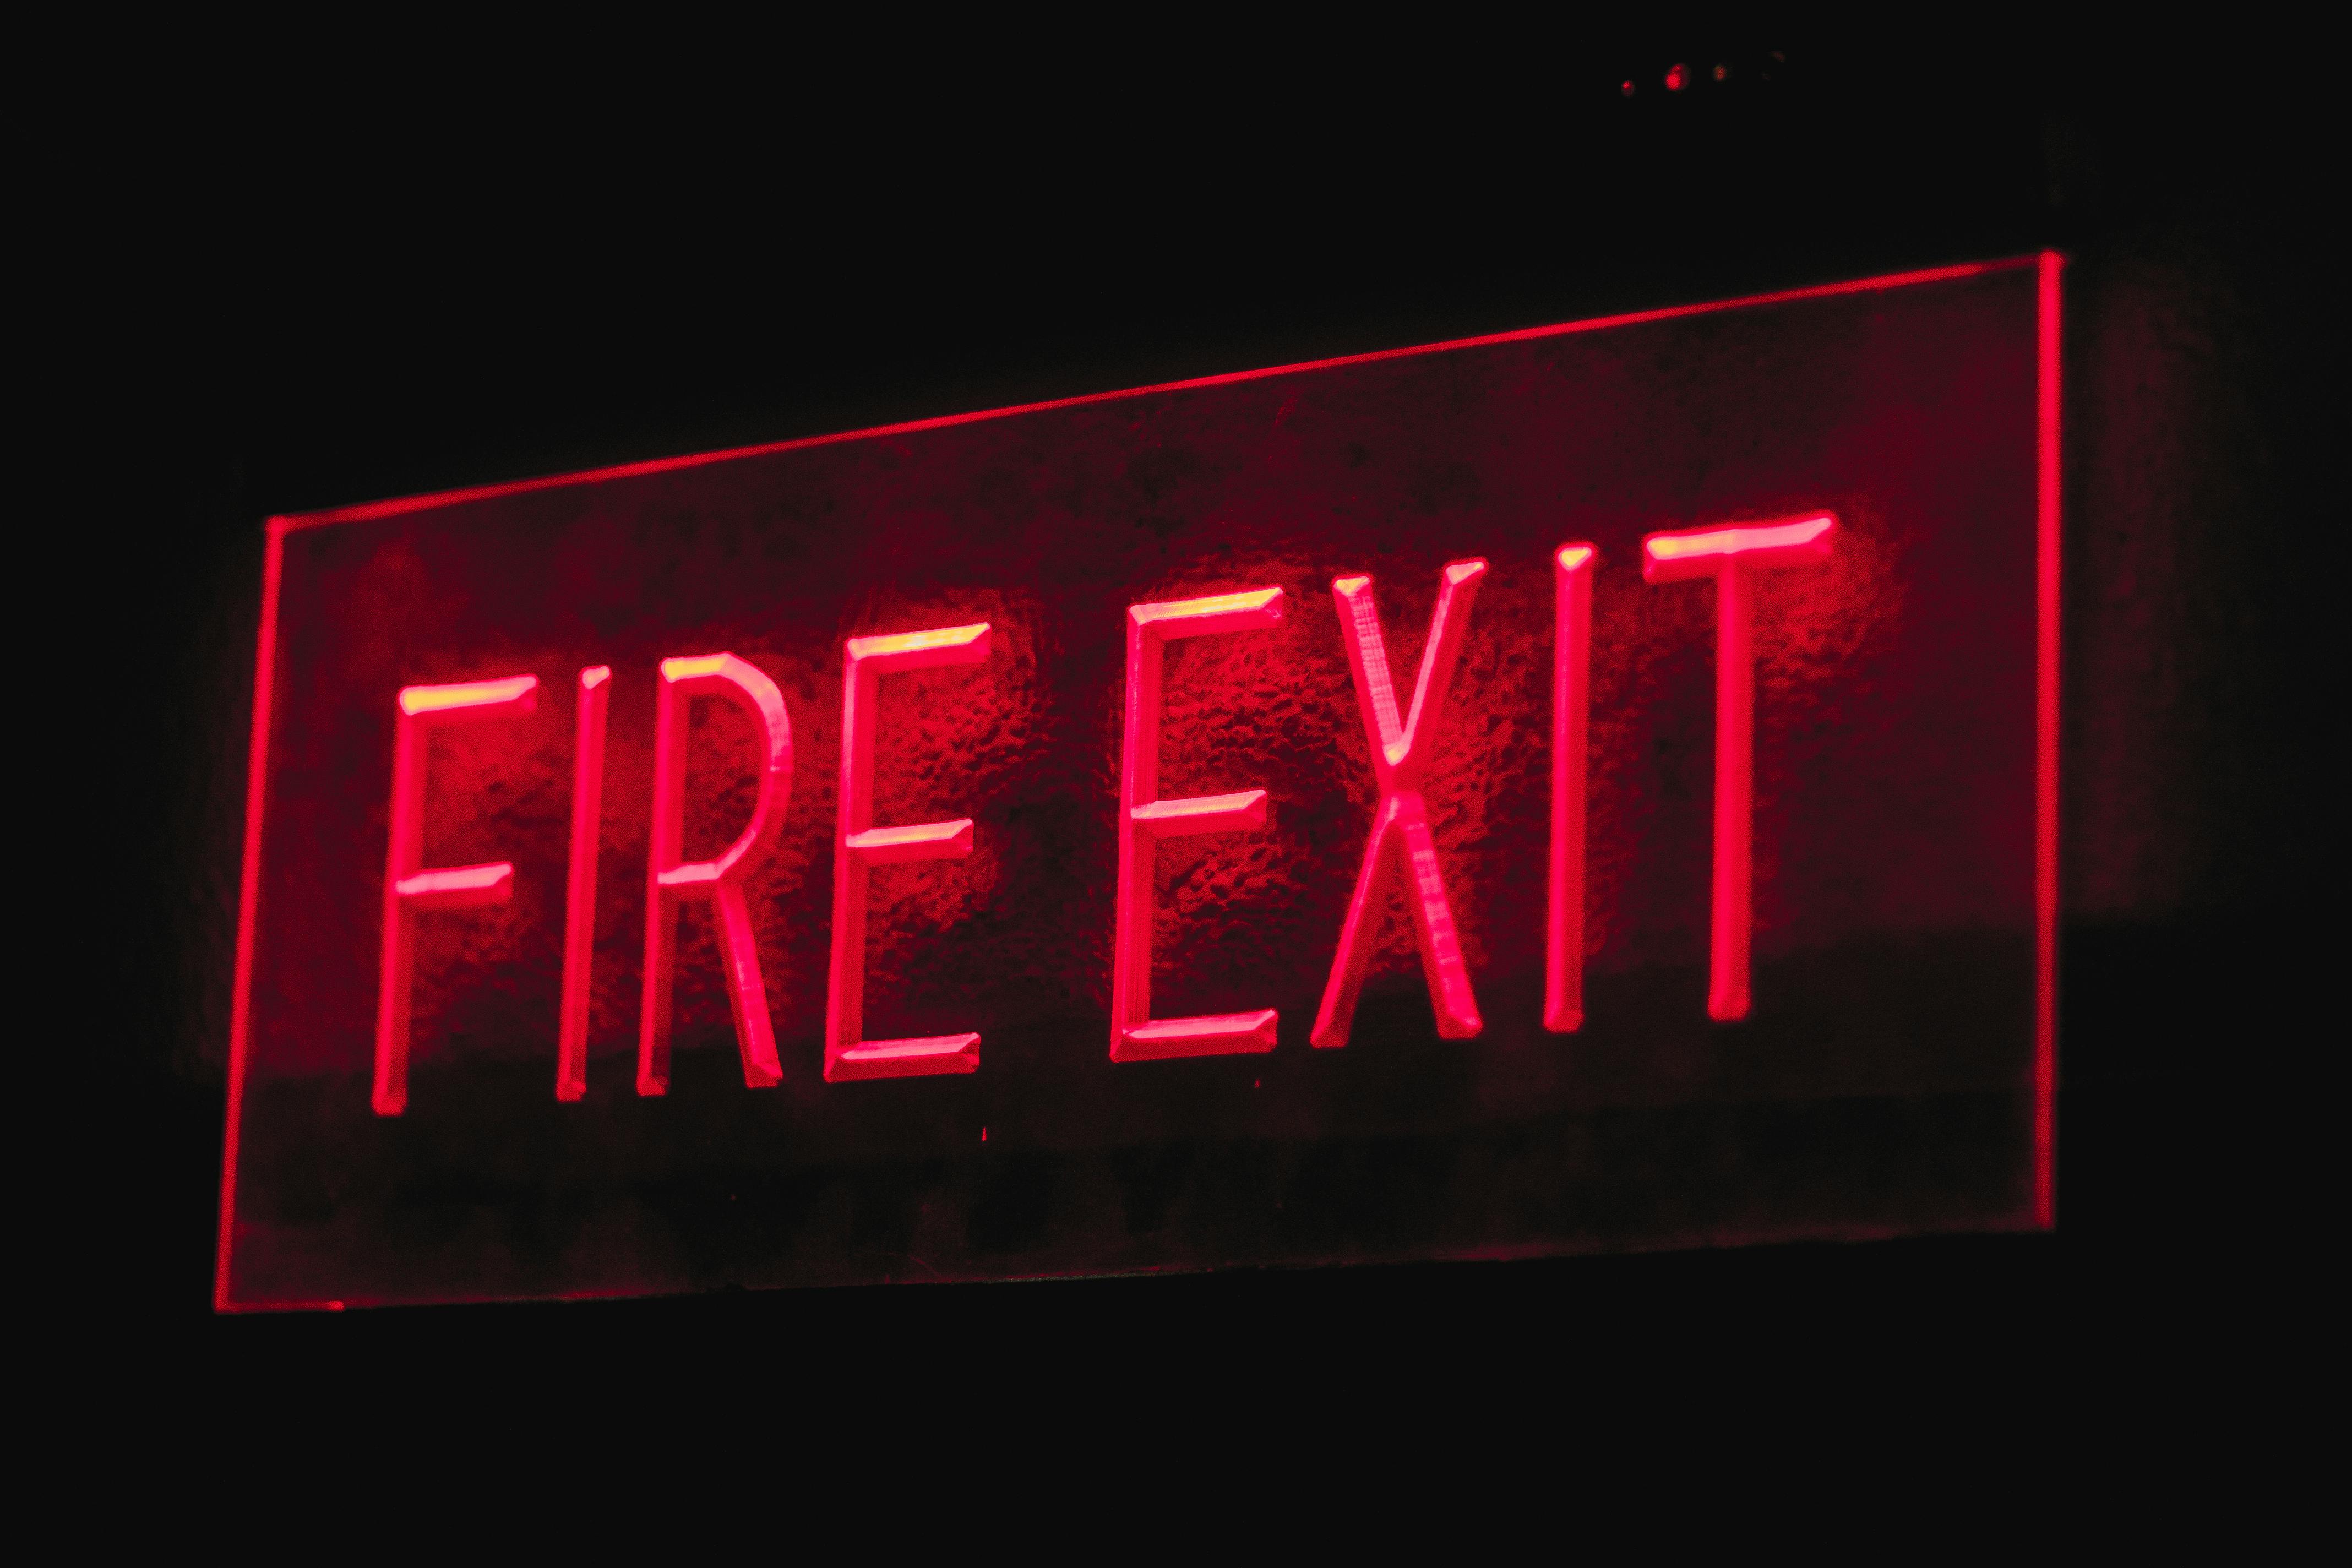 fire exit signage